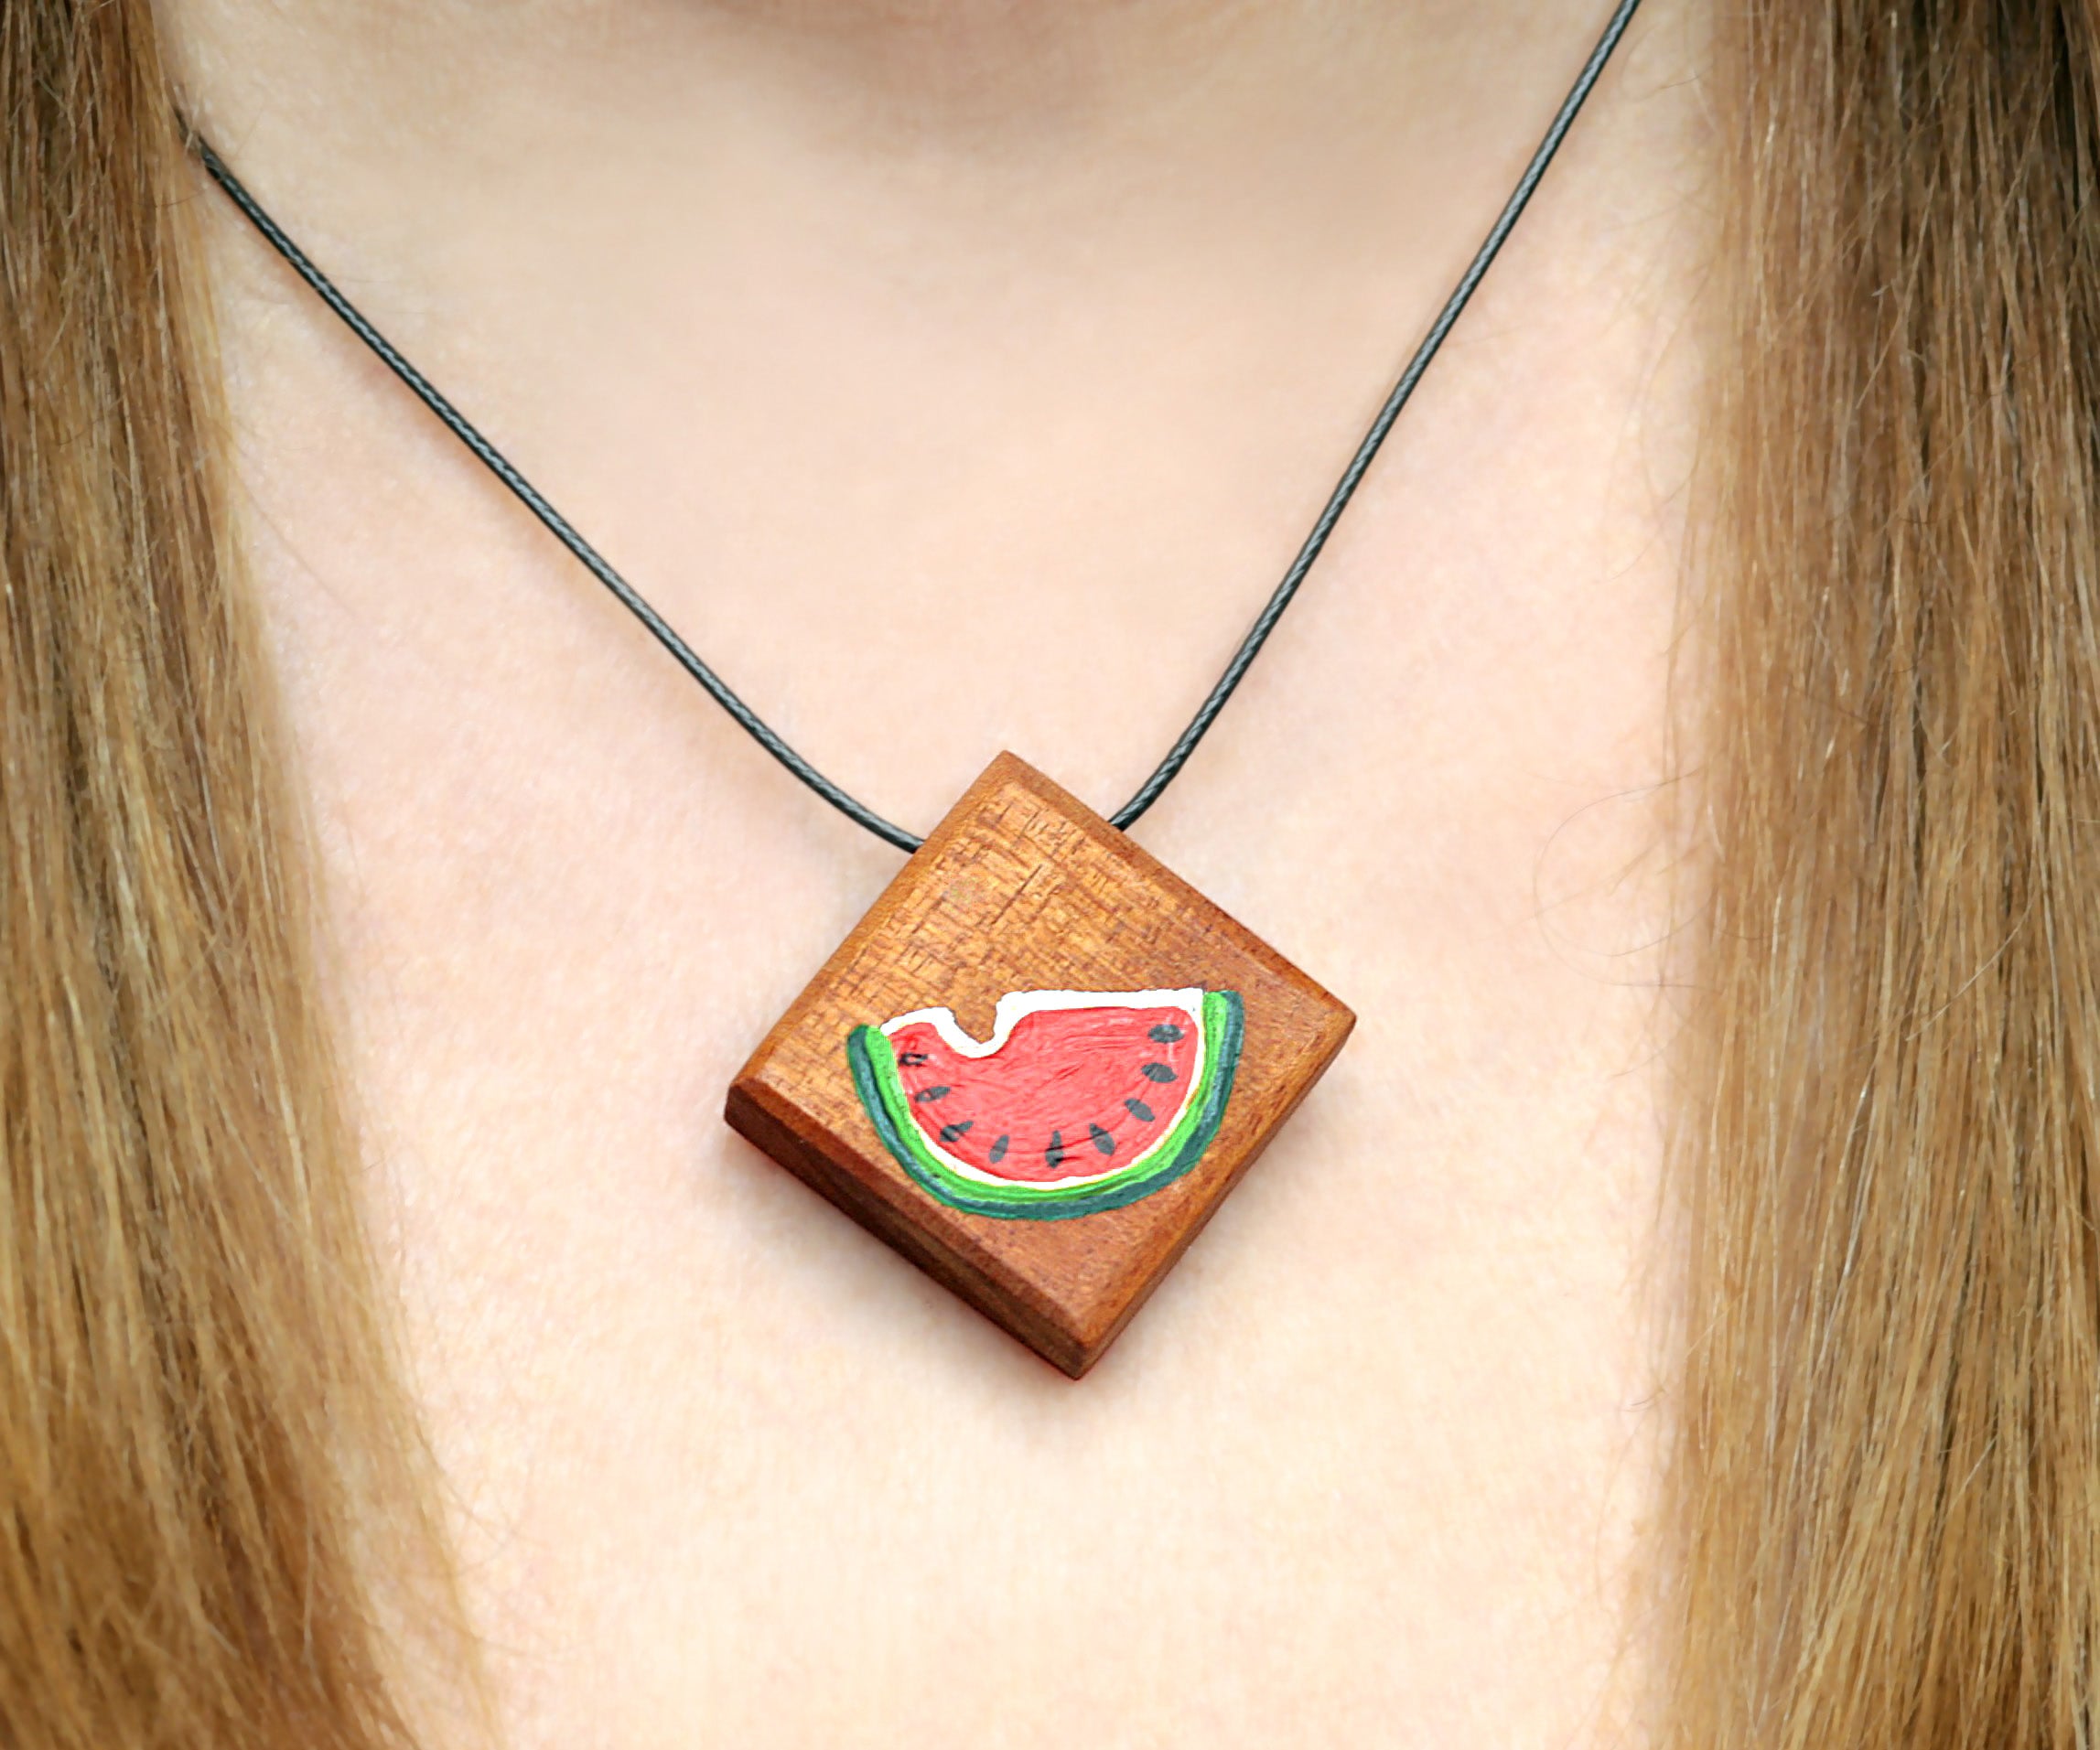 Wooden necklace with small painting original. Fine art quality painting flower pendant on artistic choker or necklace.